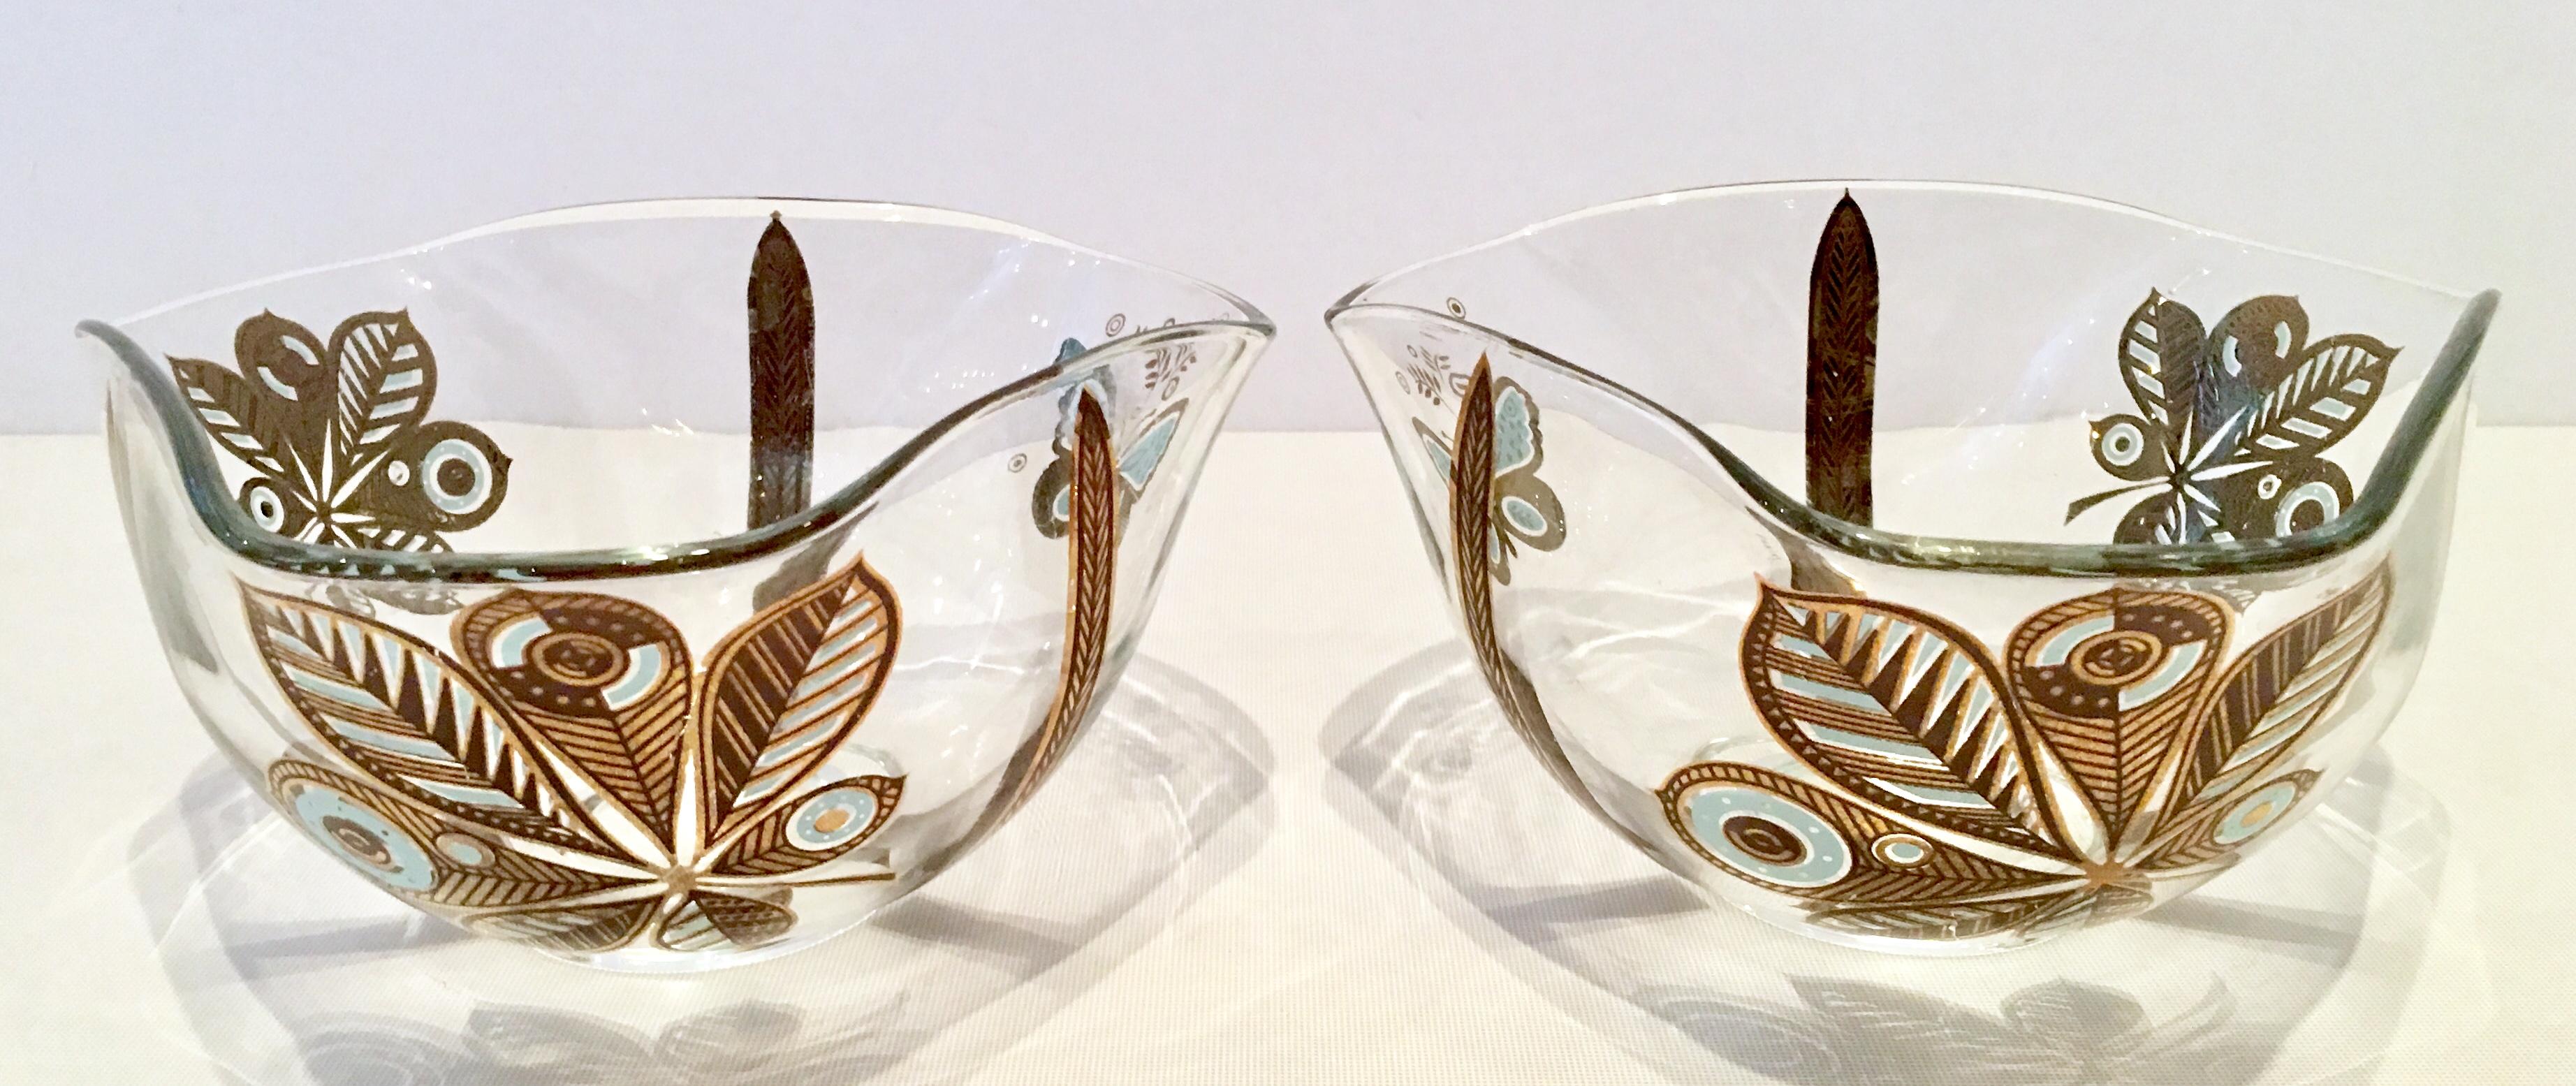 20th century Hollywood Regency pair of 22-karat gold printed organic form butterfly motif glass bowls by, Georges Briard. Each piece is signed on the exterior bottom with the Geroges Briard Trademark.